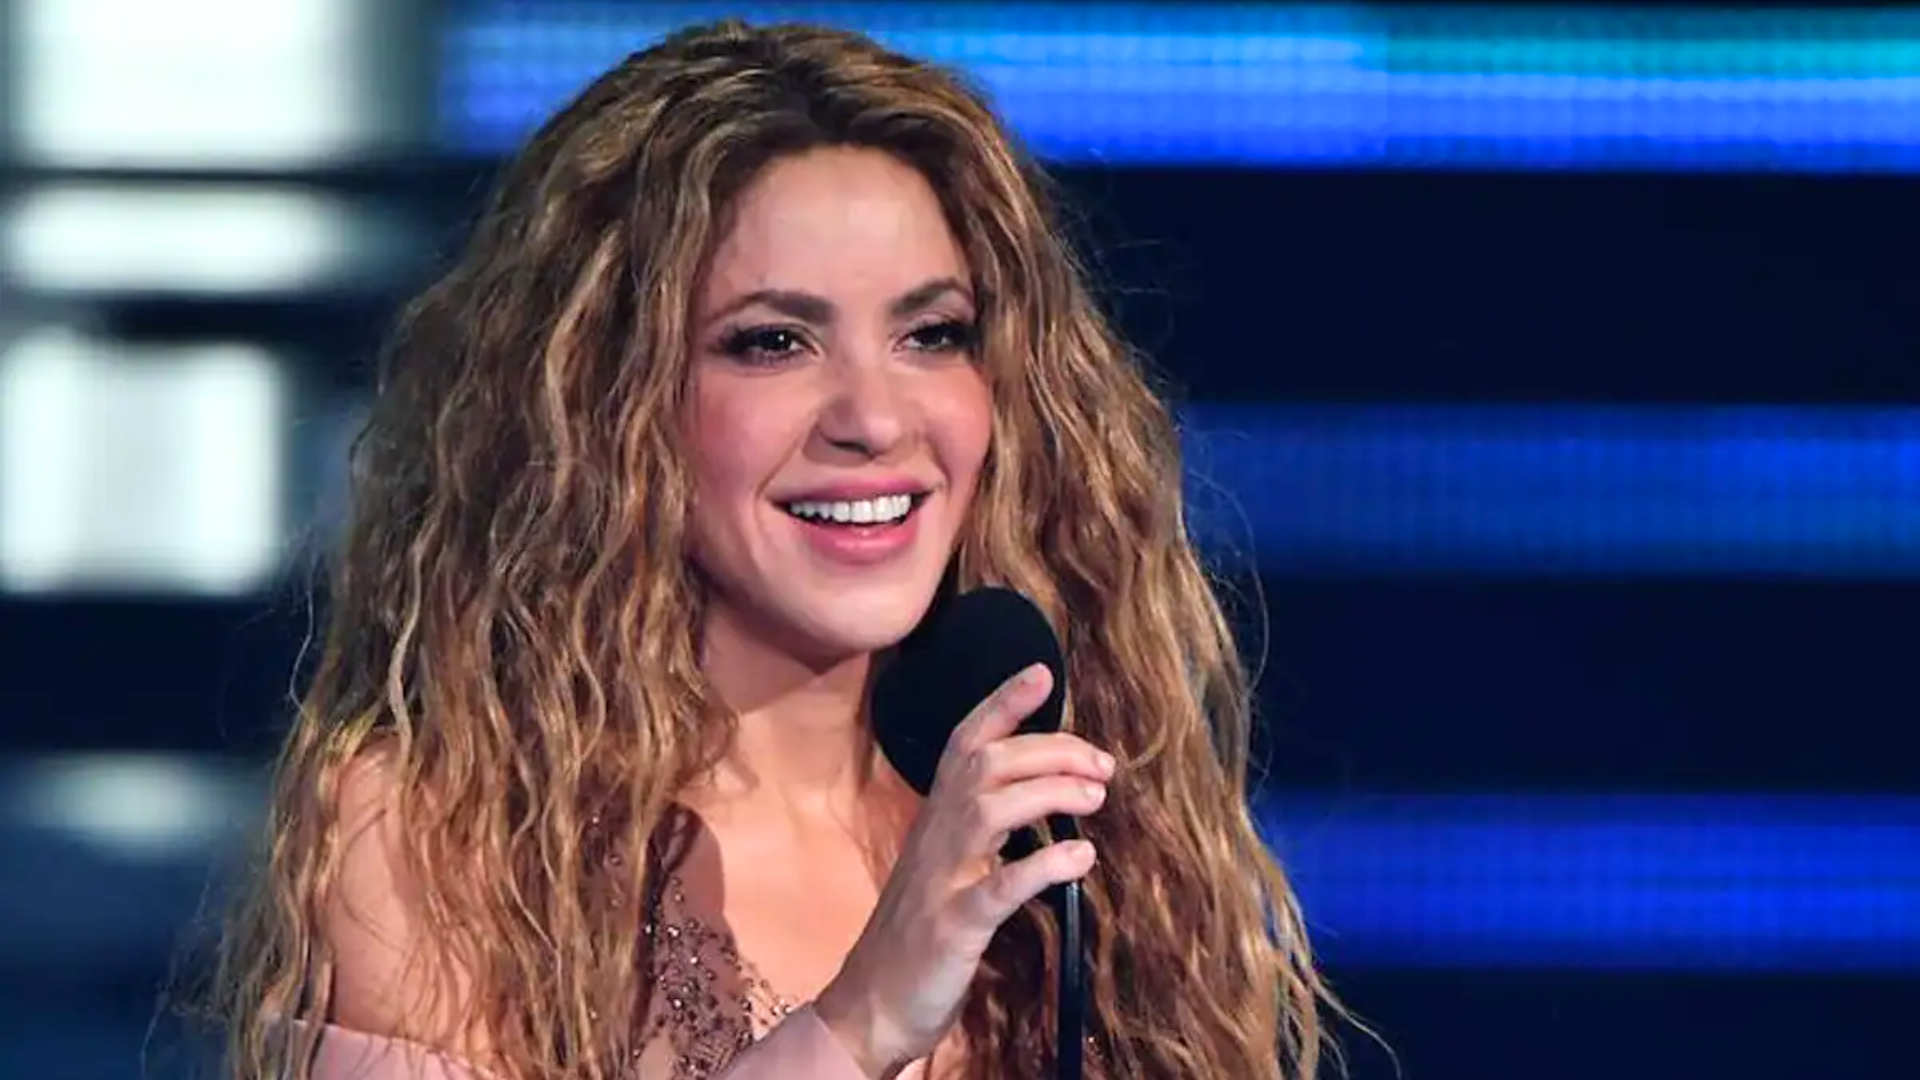 Shakira Dubs Her Signature Yodeling In Her Early Music Days As Cringe: “I Think It Was Exaggerated”